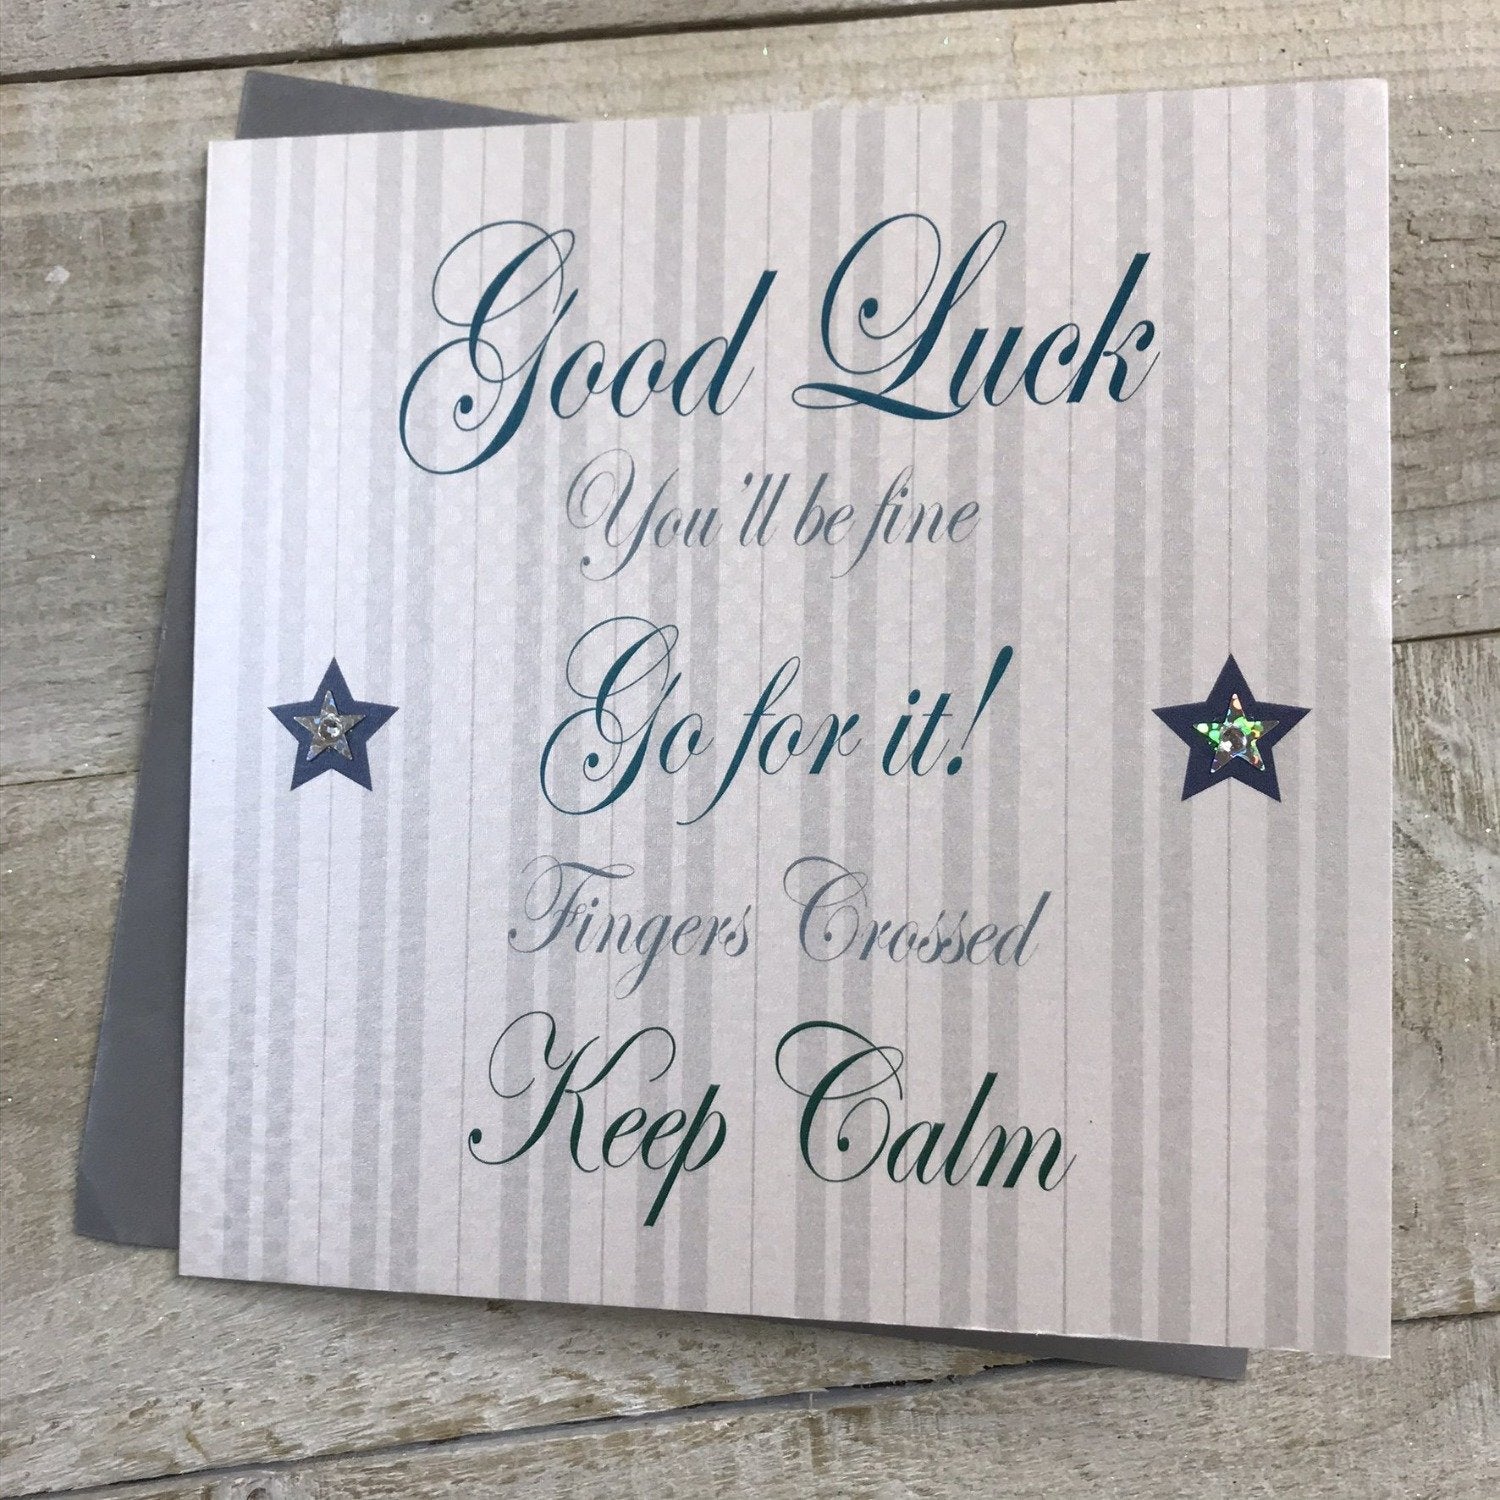 Good Luck Card - Stripes & Two Stars